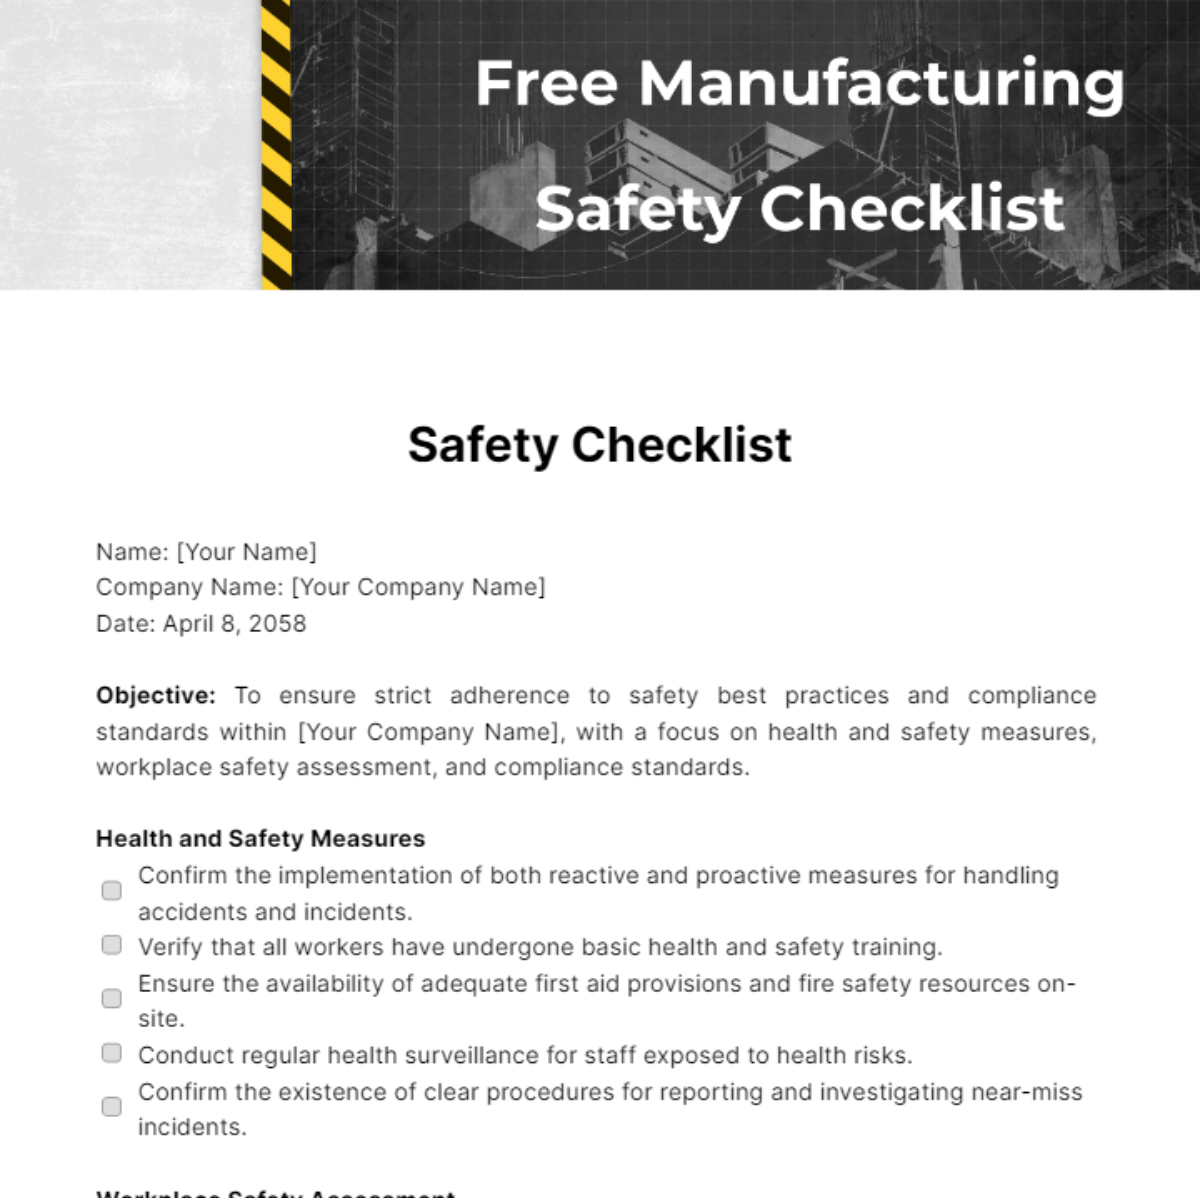 Free Manufacturing Safety Checklist Template